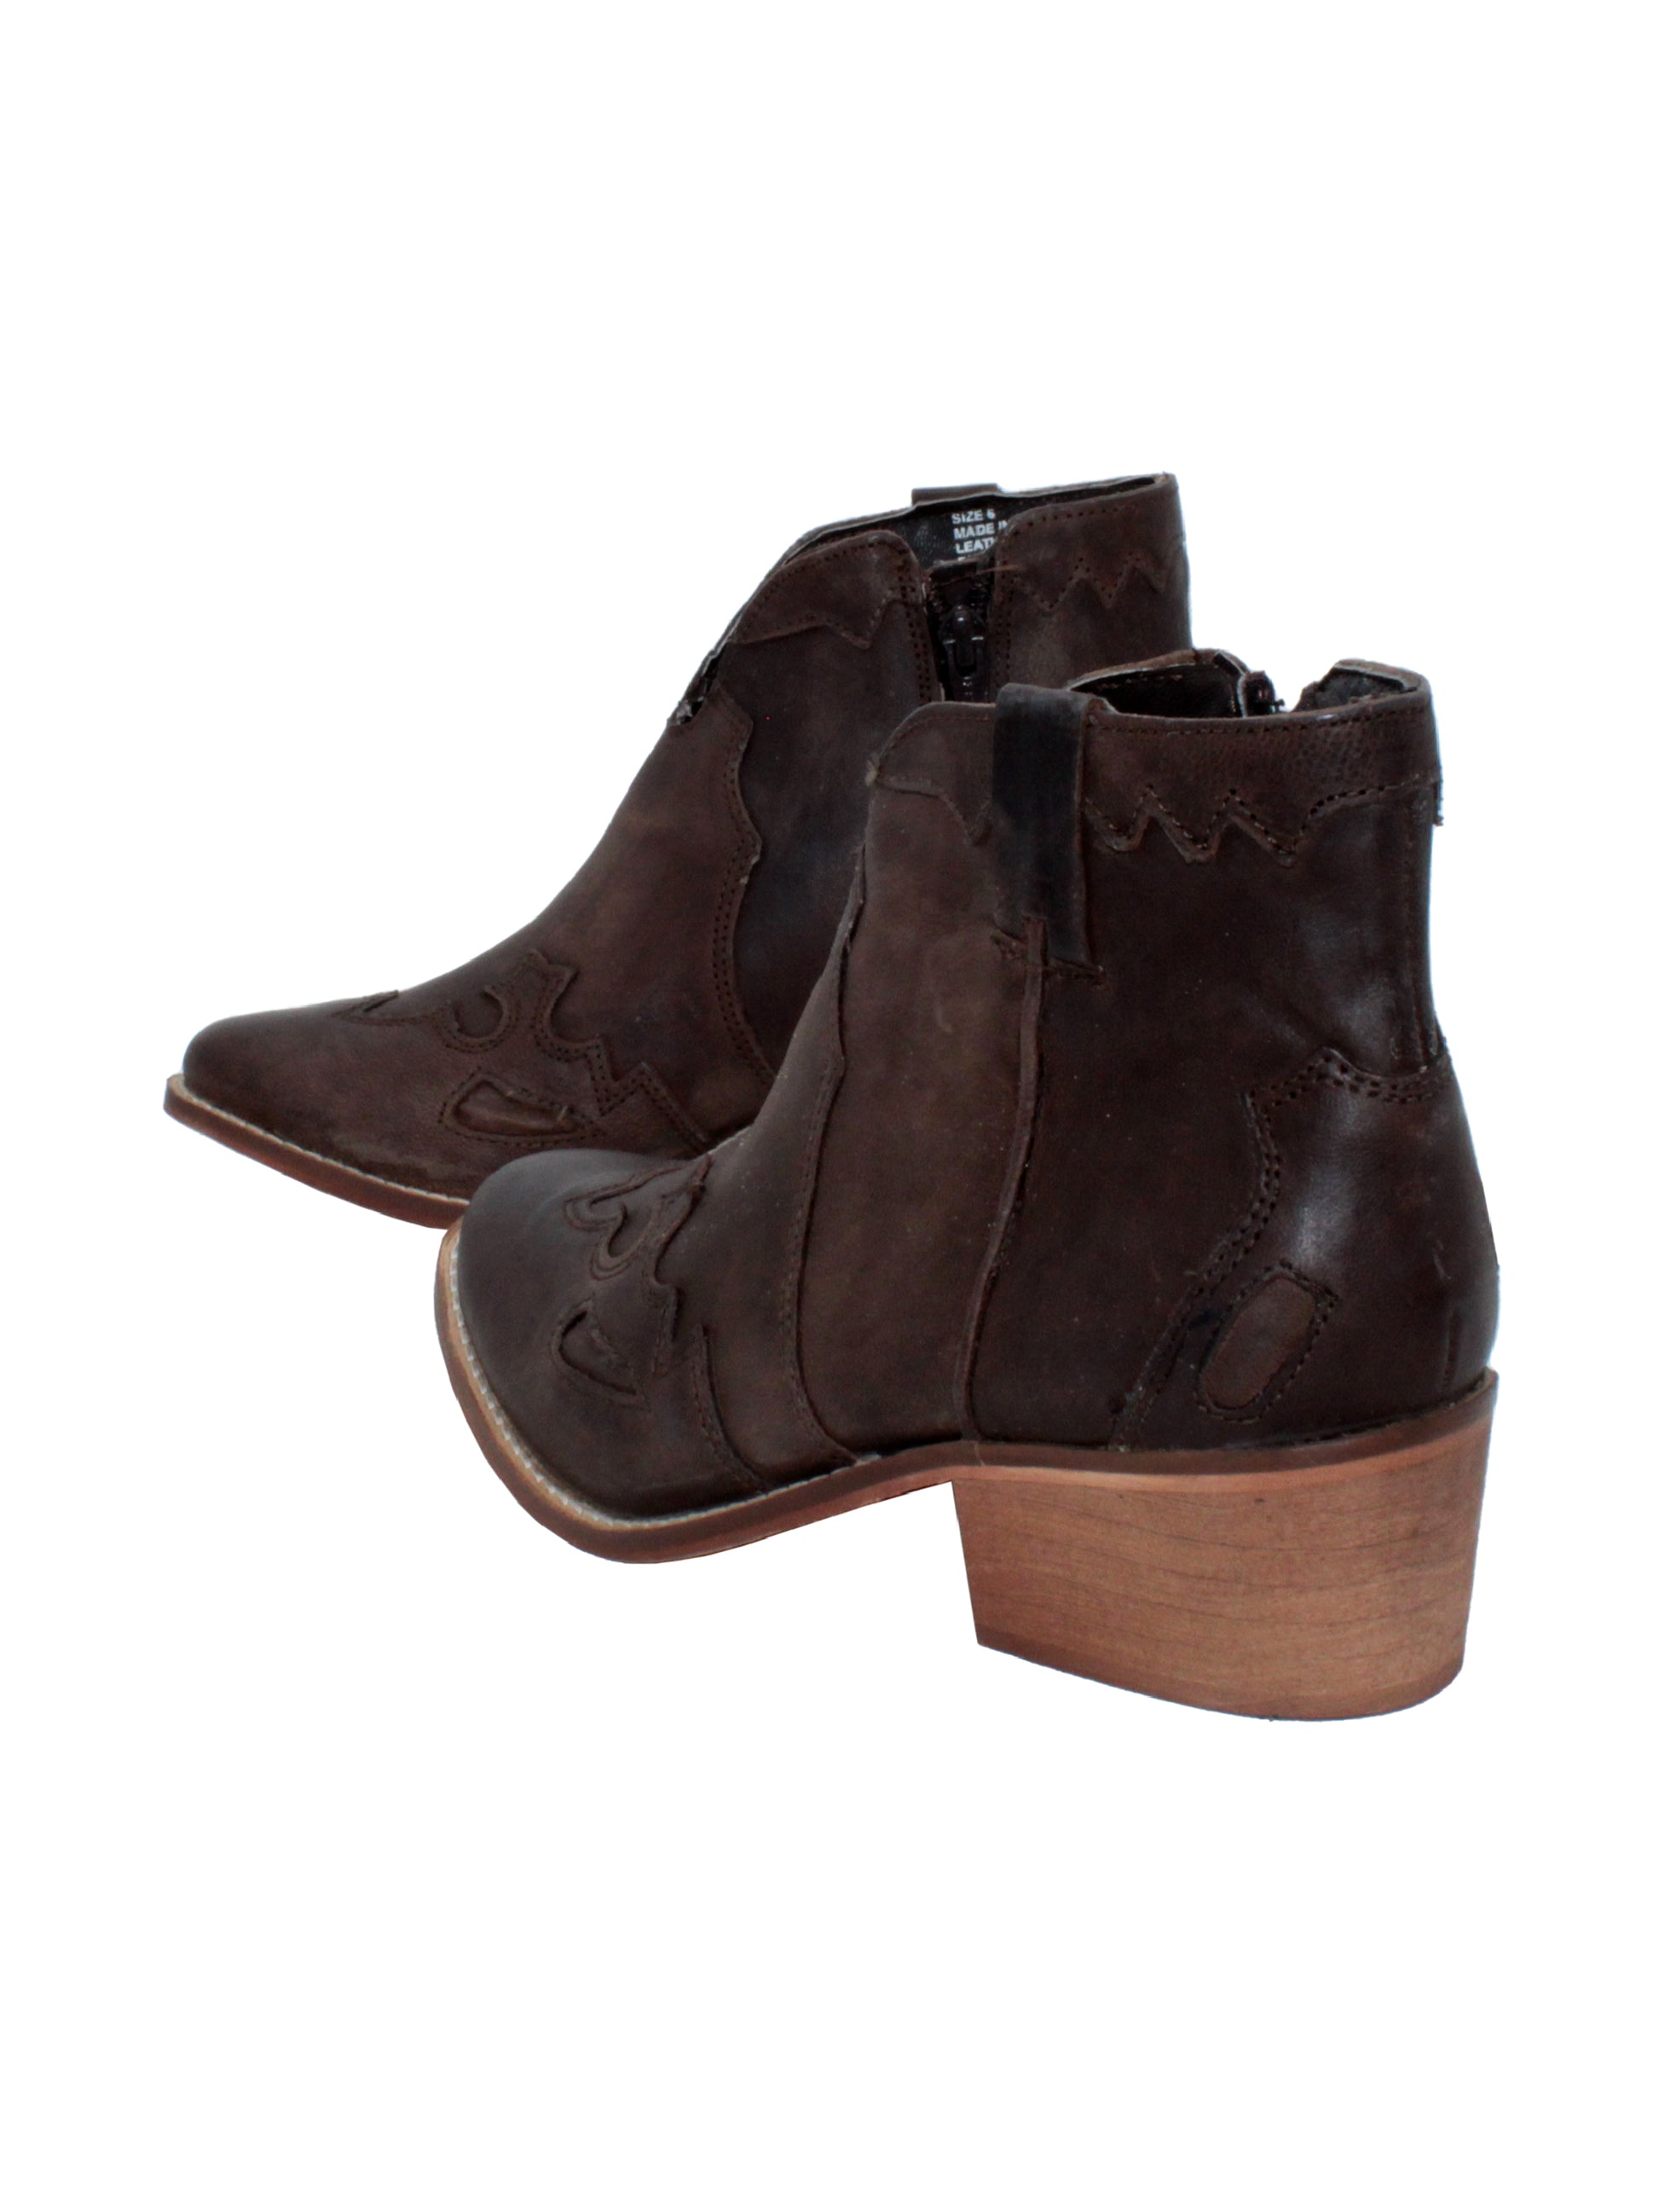 Very Volatile’s ‘Drexel’ bootie is a western inspired ankle boot made in rich burnished leather. Featuring a dipped front topline, western overlays, and genuine stack heel. The inside zipper and self pull loops allow for easy on and off. Pair these with your favorite jeans and chunky sweater for the ultimate fall look. 